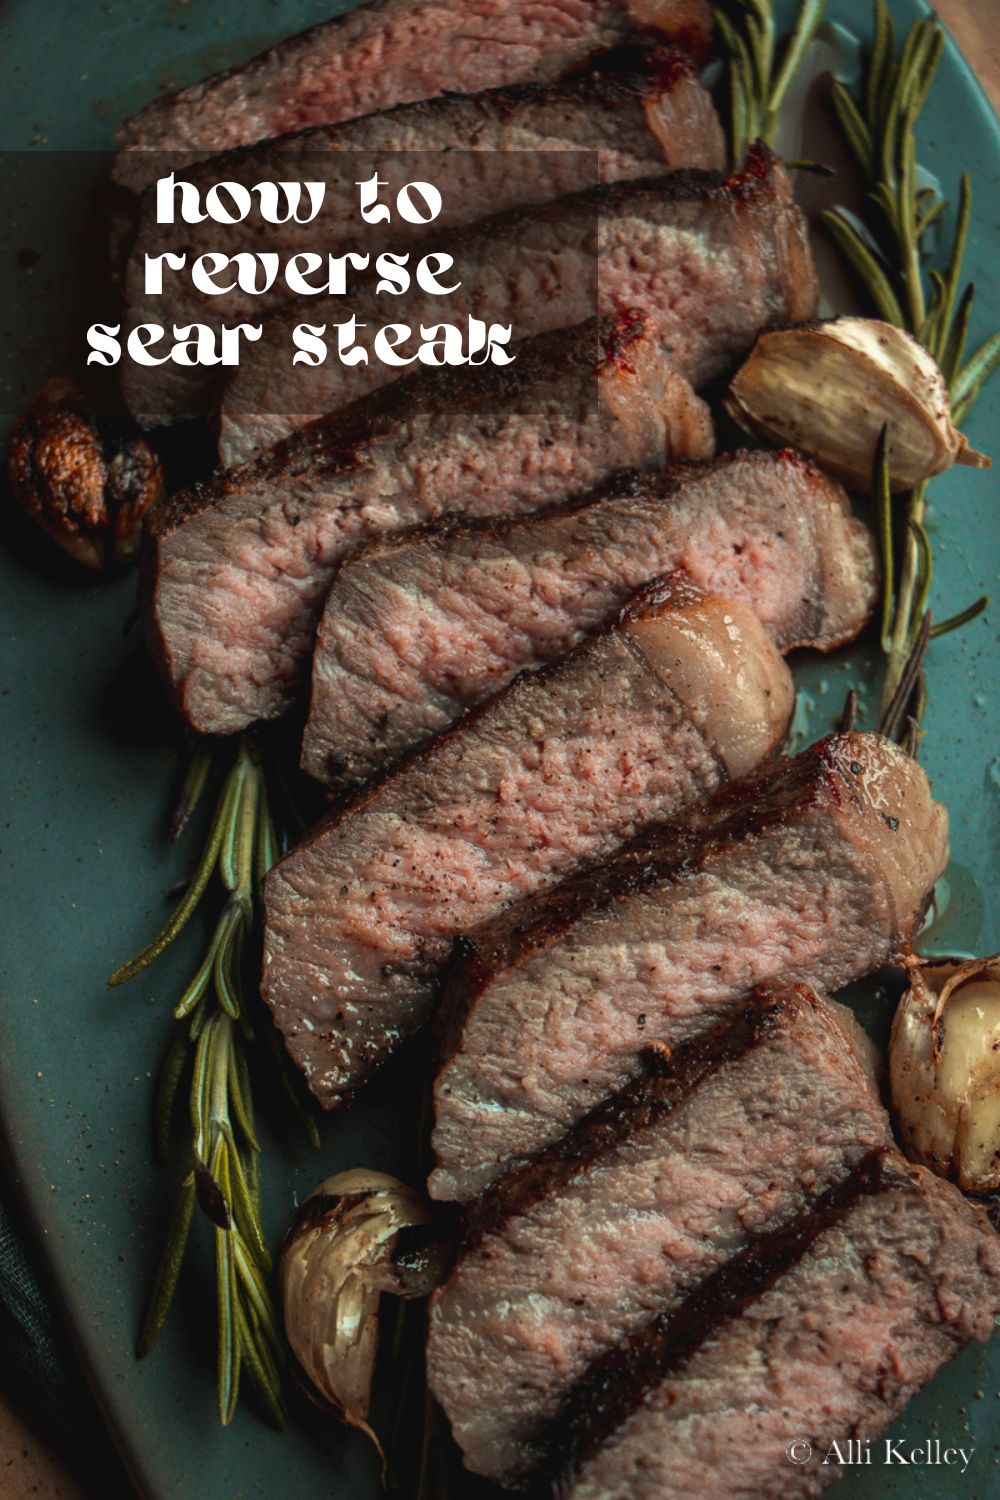 If you love nice, tender steak, then you must learn how to reverse sear a steak! Reverse searing is an easy method of cooking steak that gives you restaurant-quality results. With this method, you cook your reverse sear steak in oven before finishing it off at a high temperature - which results in a gorgeous browned crust and a juicy steak!